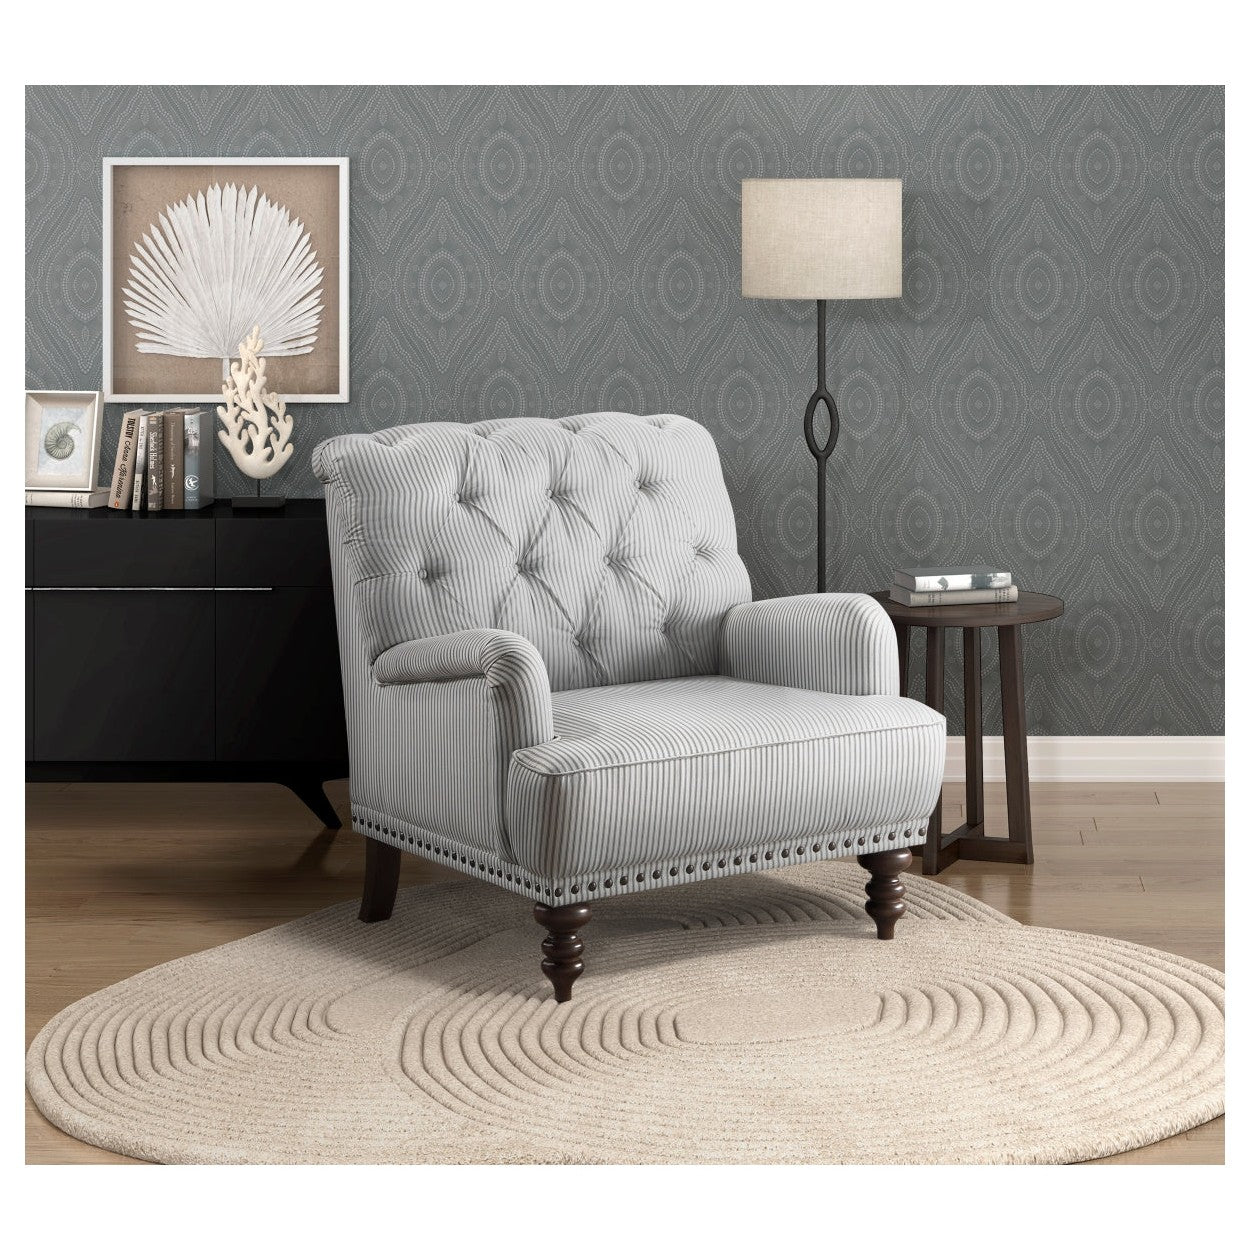 Tufted Accent Chair w/nailheads, Gray/White 1201F5S